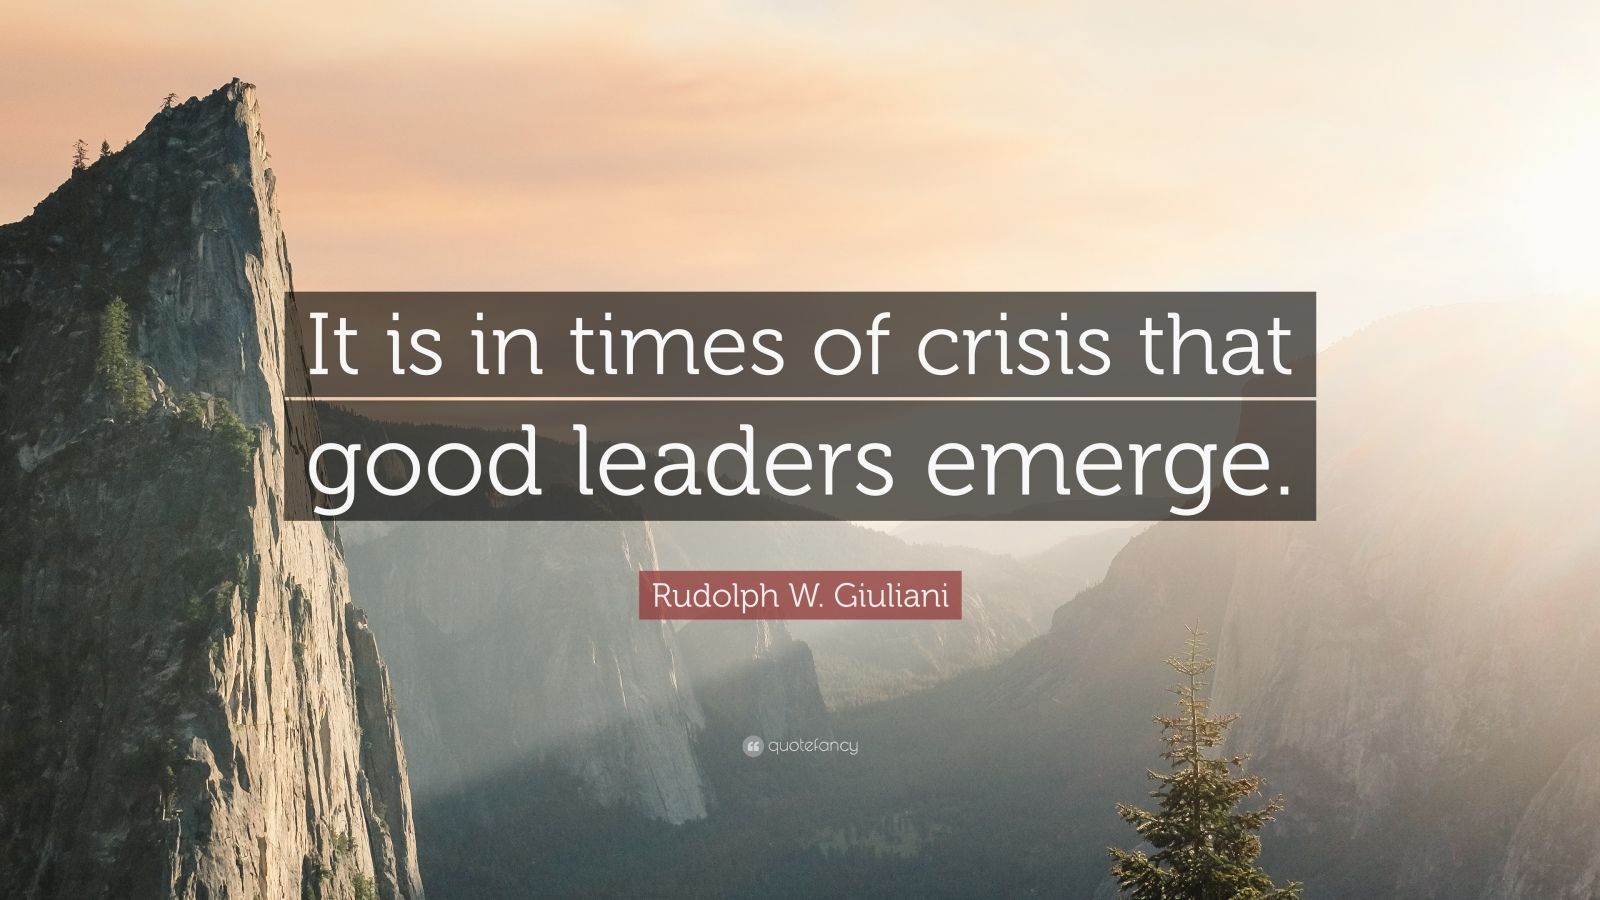 Rudolph W. Giuliani Quote: “It is in times of crisis that good leaders